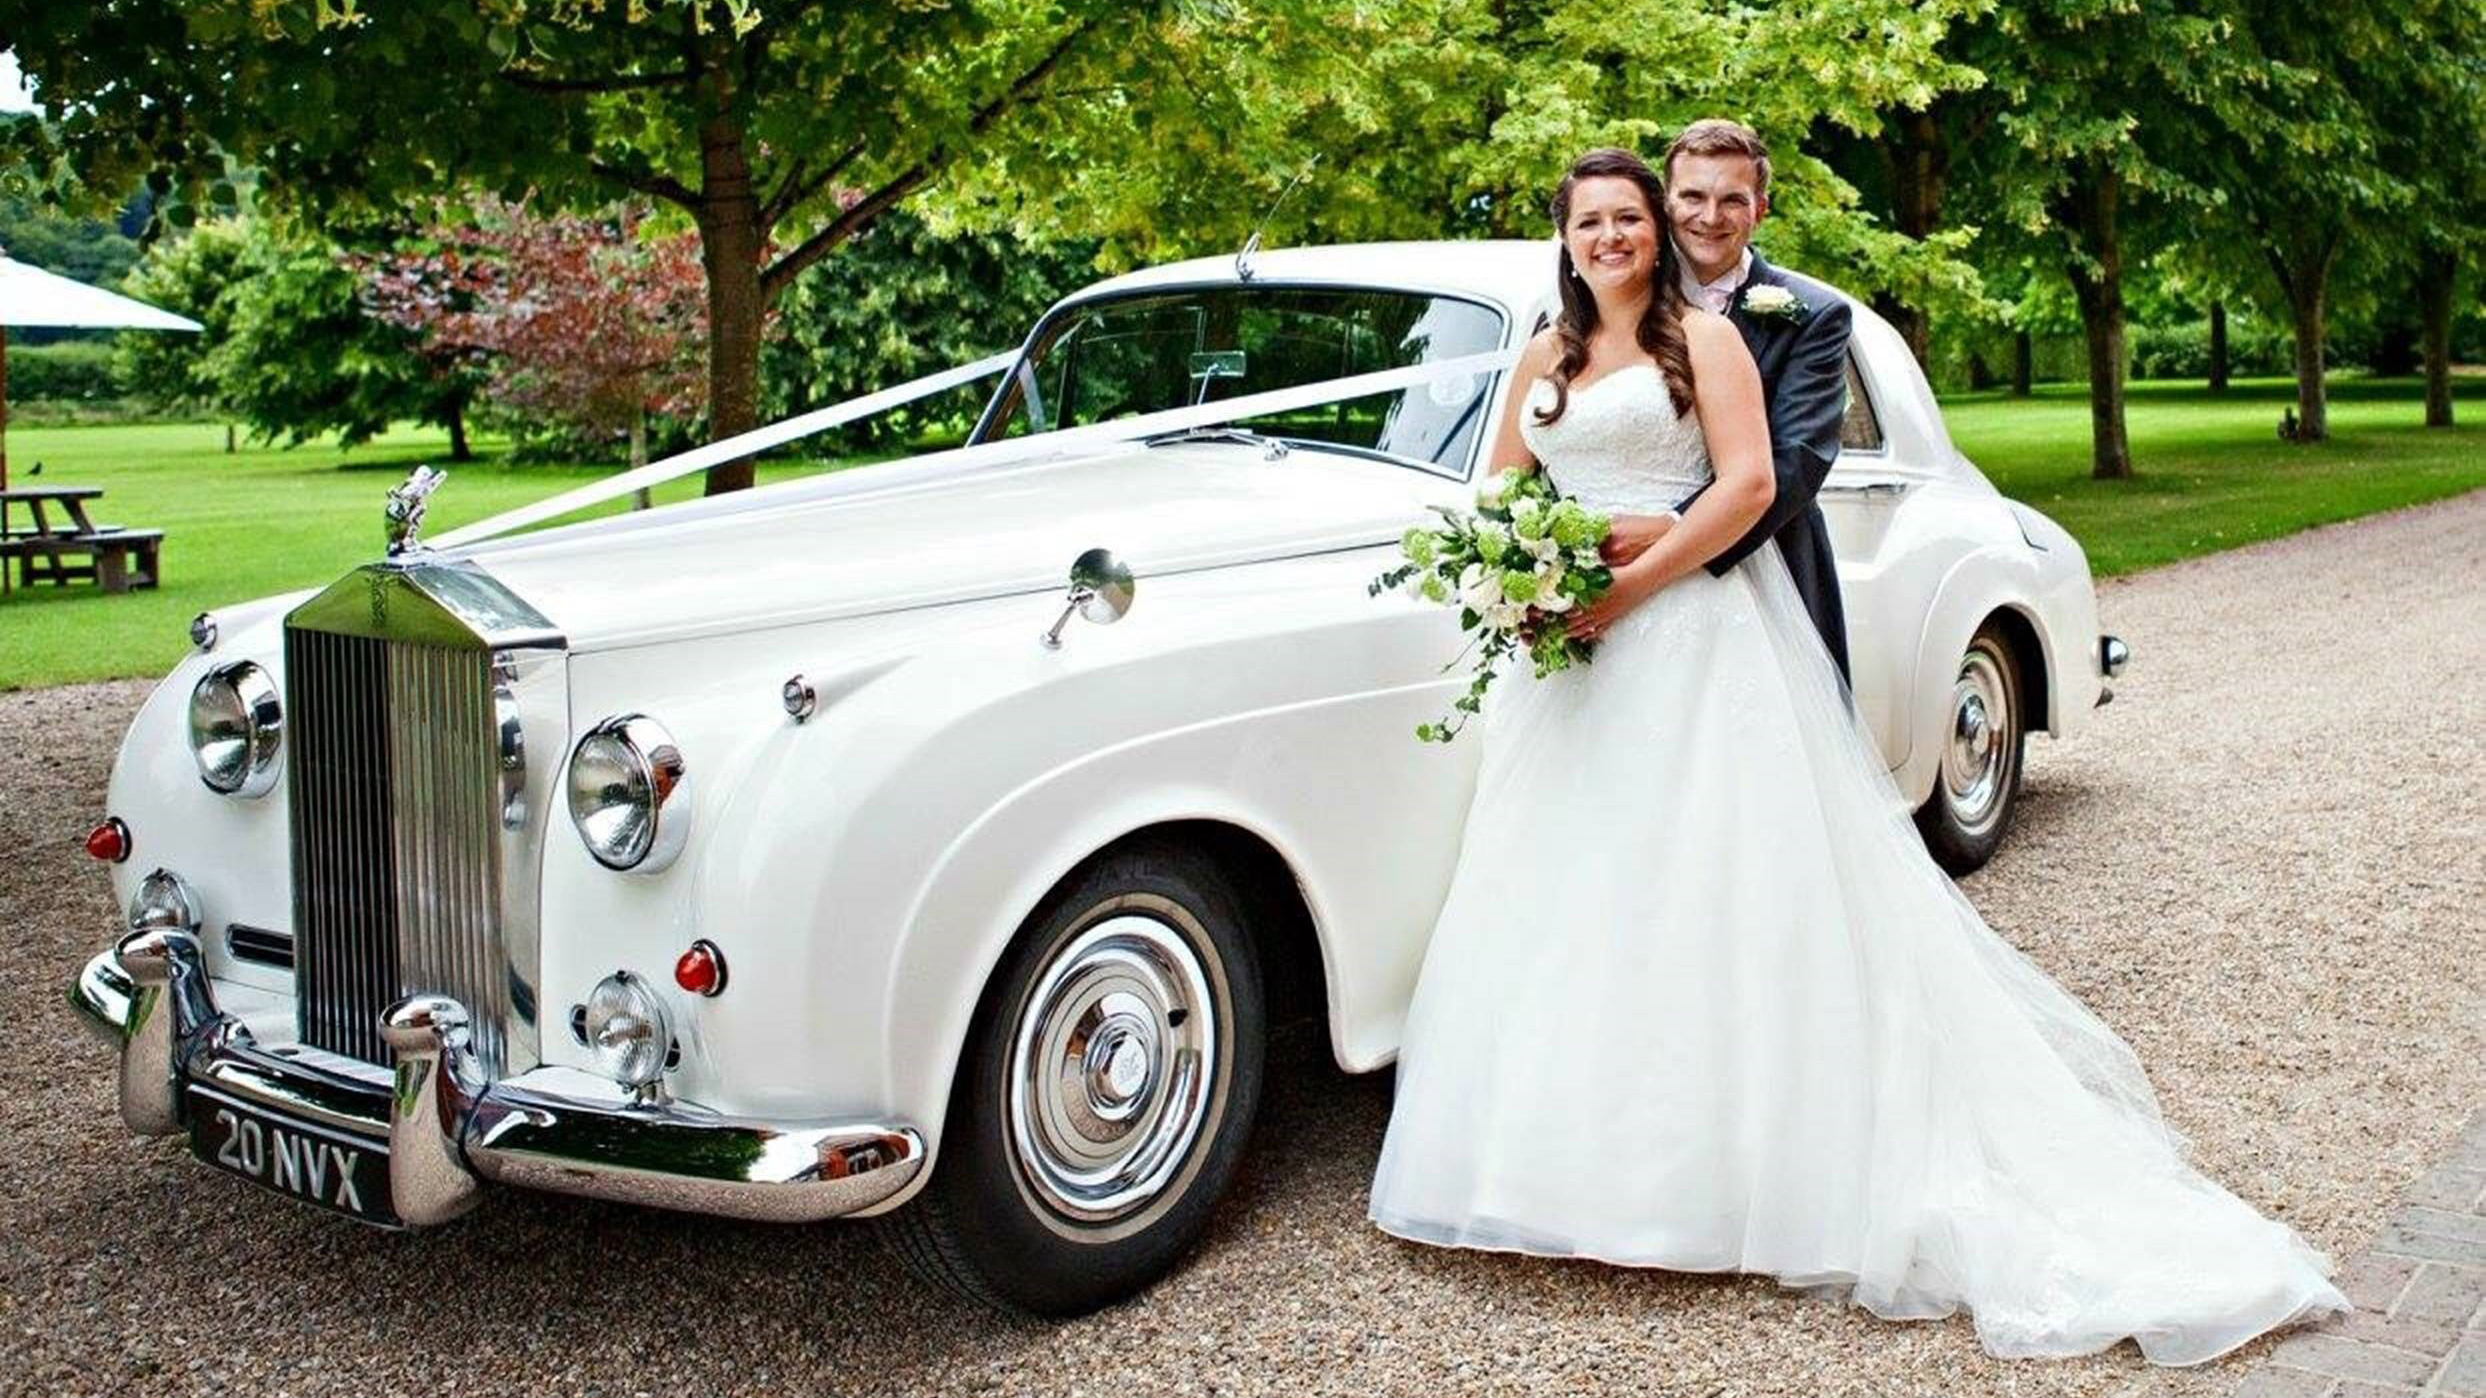 White Rolls-Royce Silver cloud decorated with ivory ribbons parked in the entrance of a wedding venue in Stotfold. Bride and Groom are standing by the vehicle. Groom is holding his Bride in his arms while she holds her bridal bouquet.